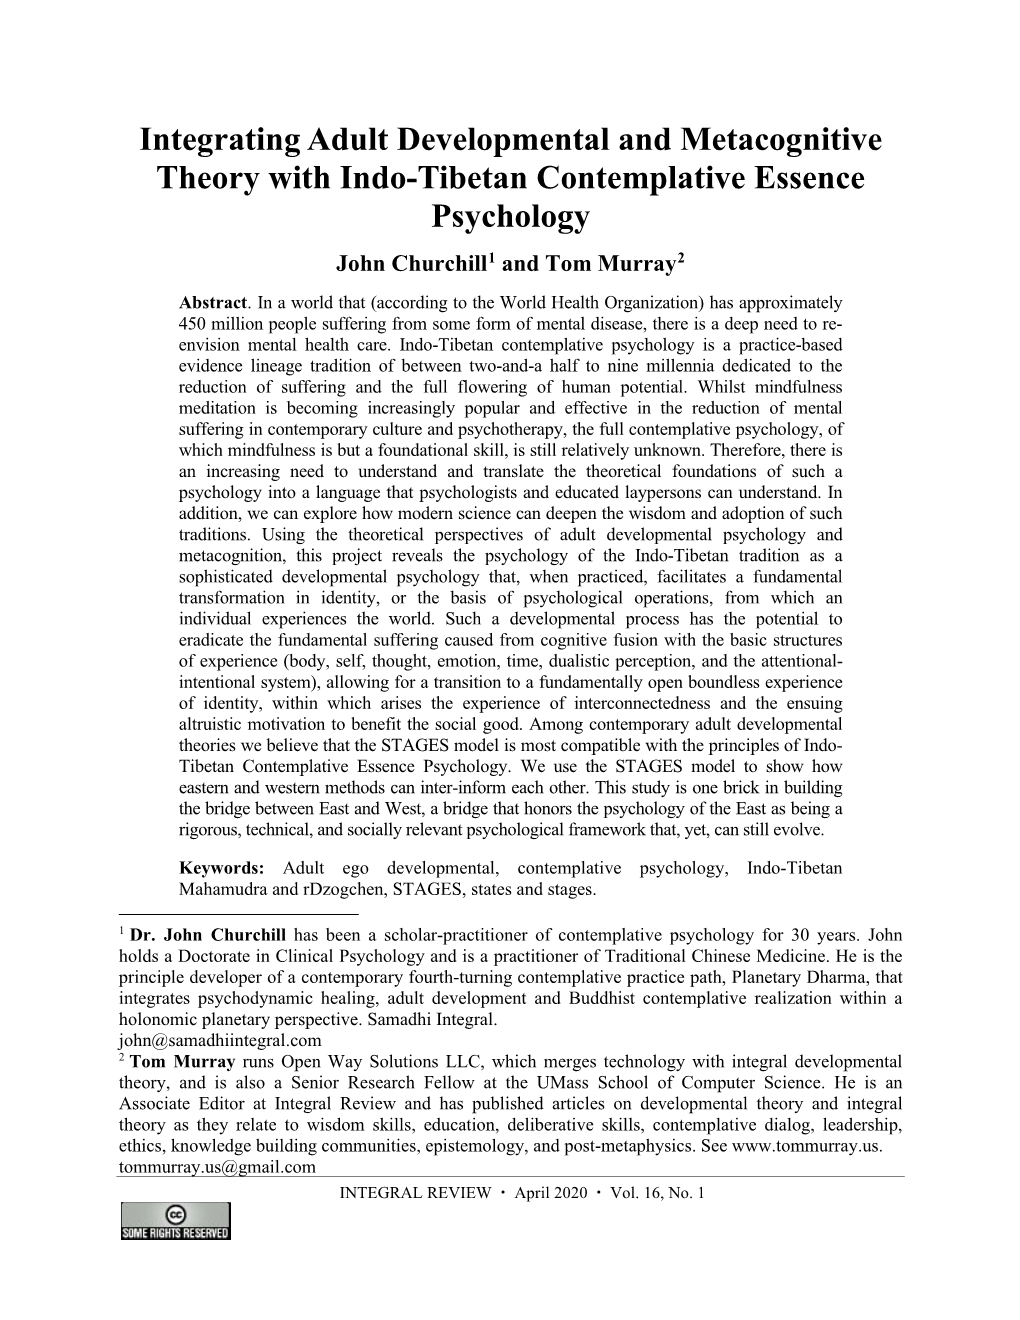 Integrating Adult Developmental and Metacognitive Theory with Indo-Tibetan Contemplative Essence Psychology